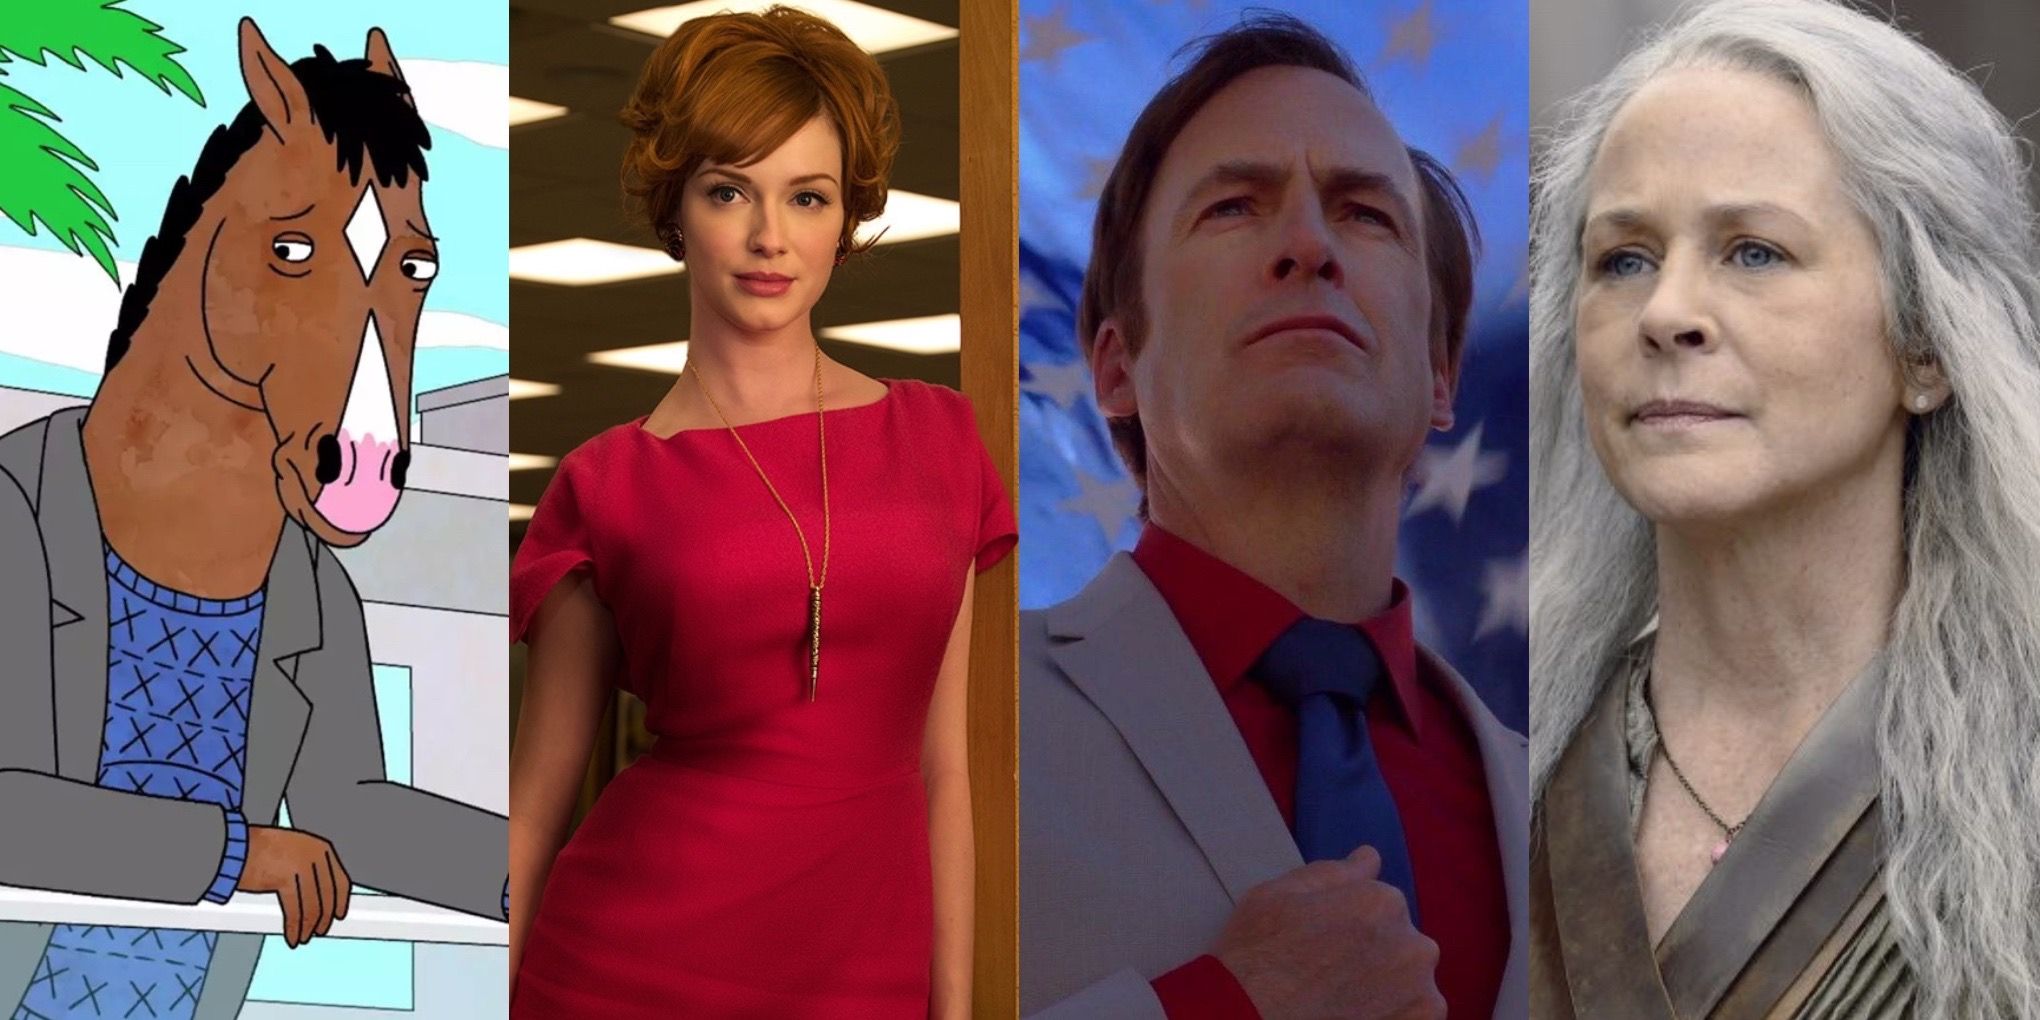 Characters from from Bojack Horseman, Mad Men, Better Call Saul and The Walking Dead